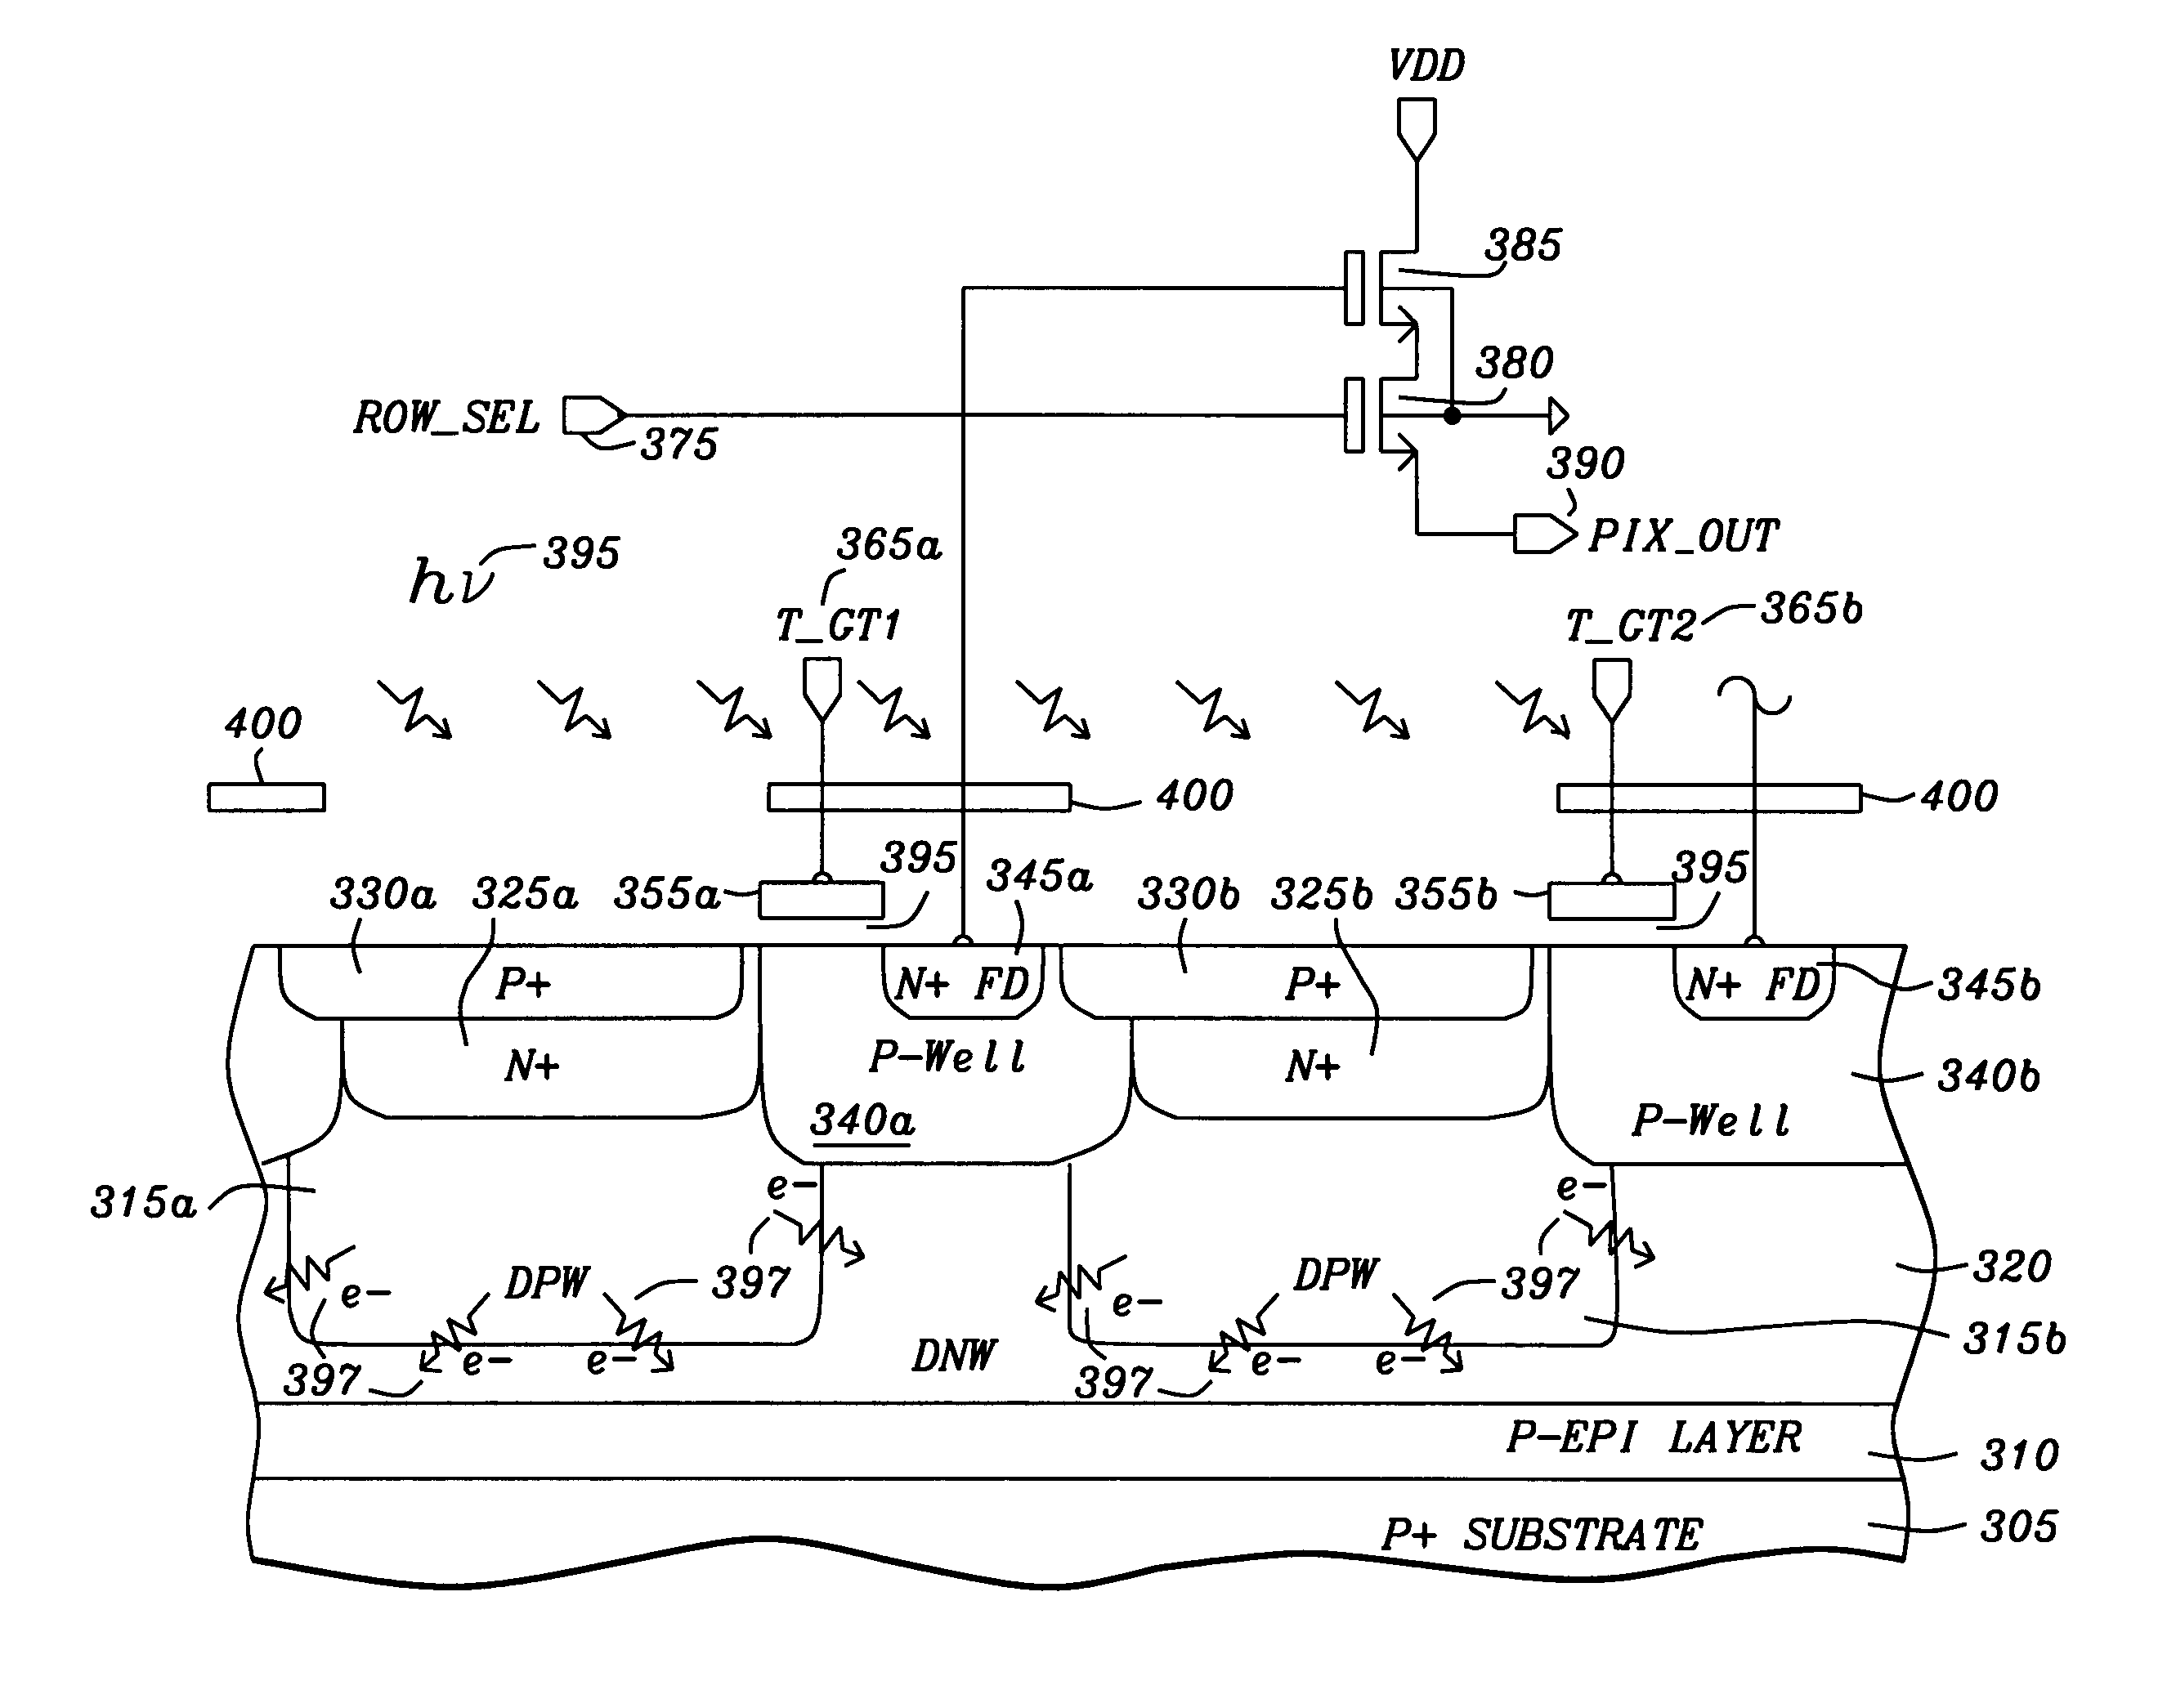 Pinned photodiode (PPD) pixel with high shutter rejection ratio for snapshot operating CMOS sensor